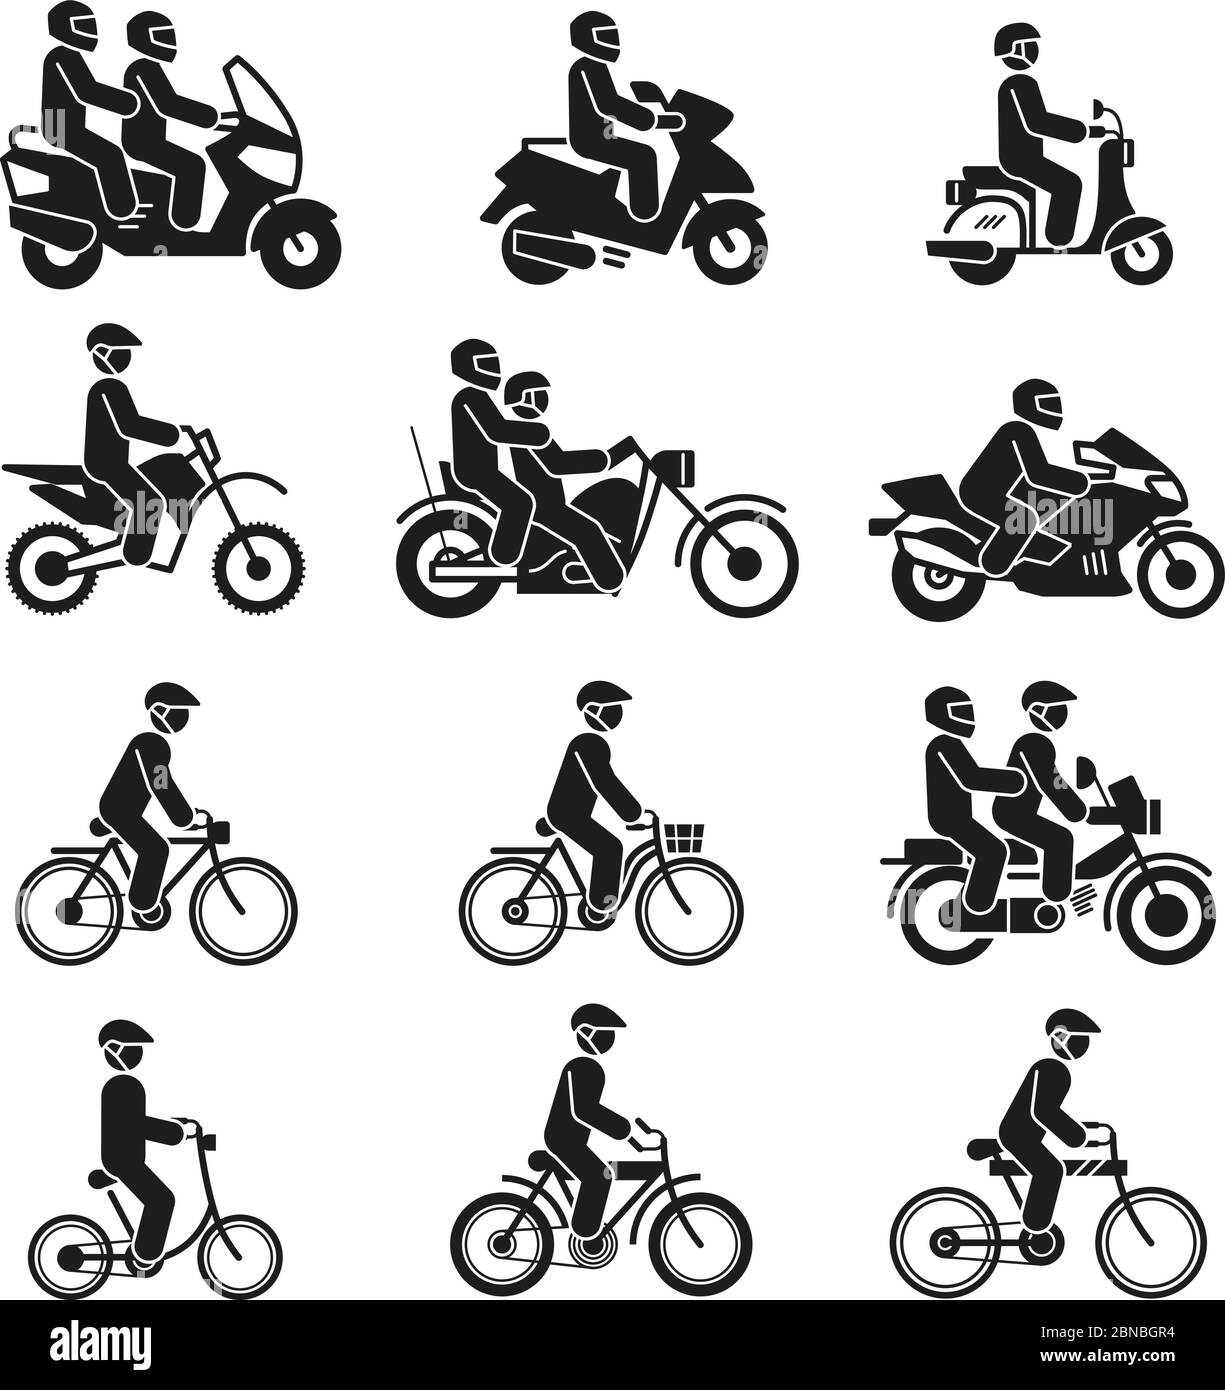 Motorcycles and bicycles icons. Moto vehicles with persons biker and cyclist vector pictograms isolated on white background. Illustration of motorcycle transport, bike and bicycle Stock Vector